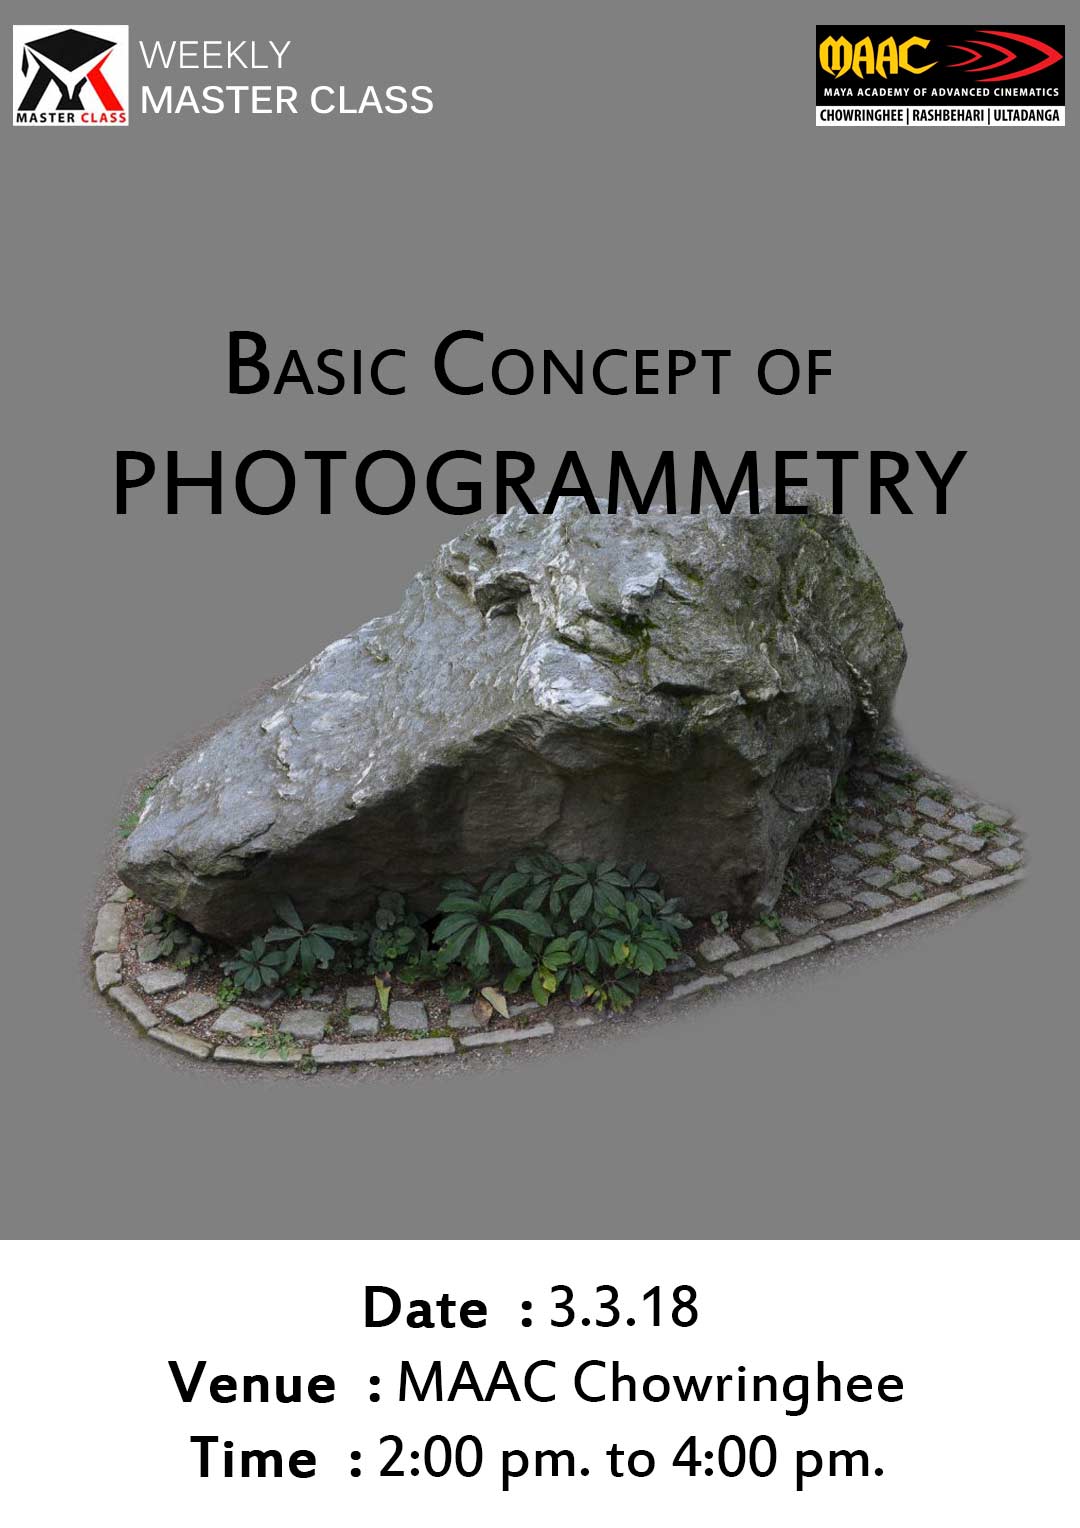 Weekly Master Class on Basic Concept Of Photogrammetry